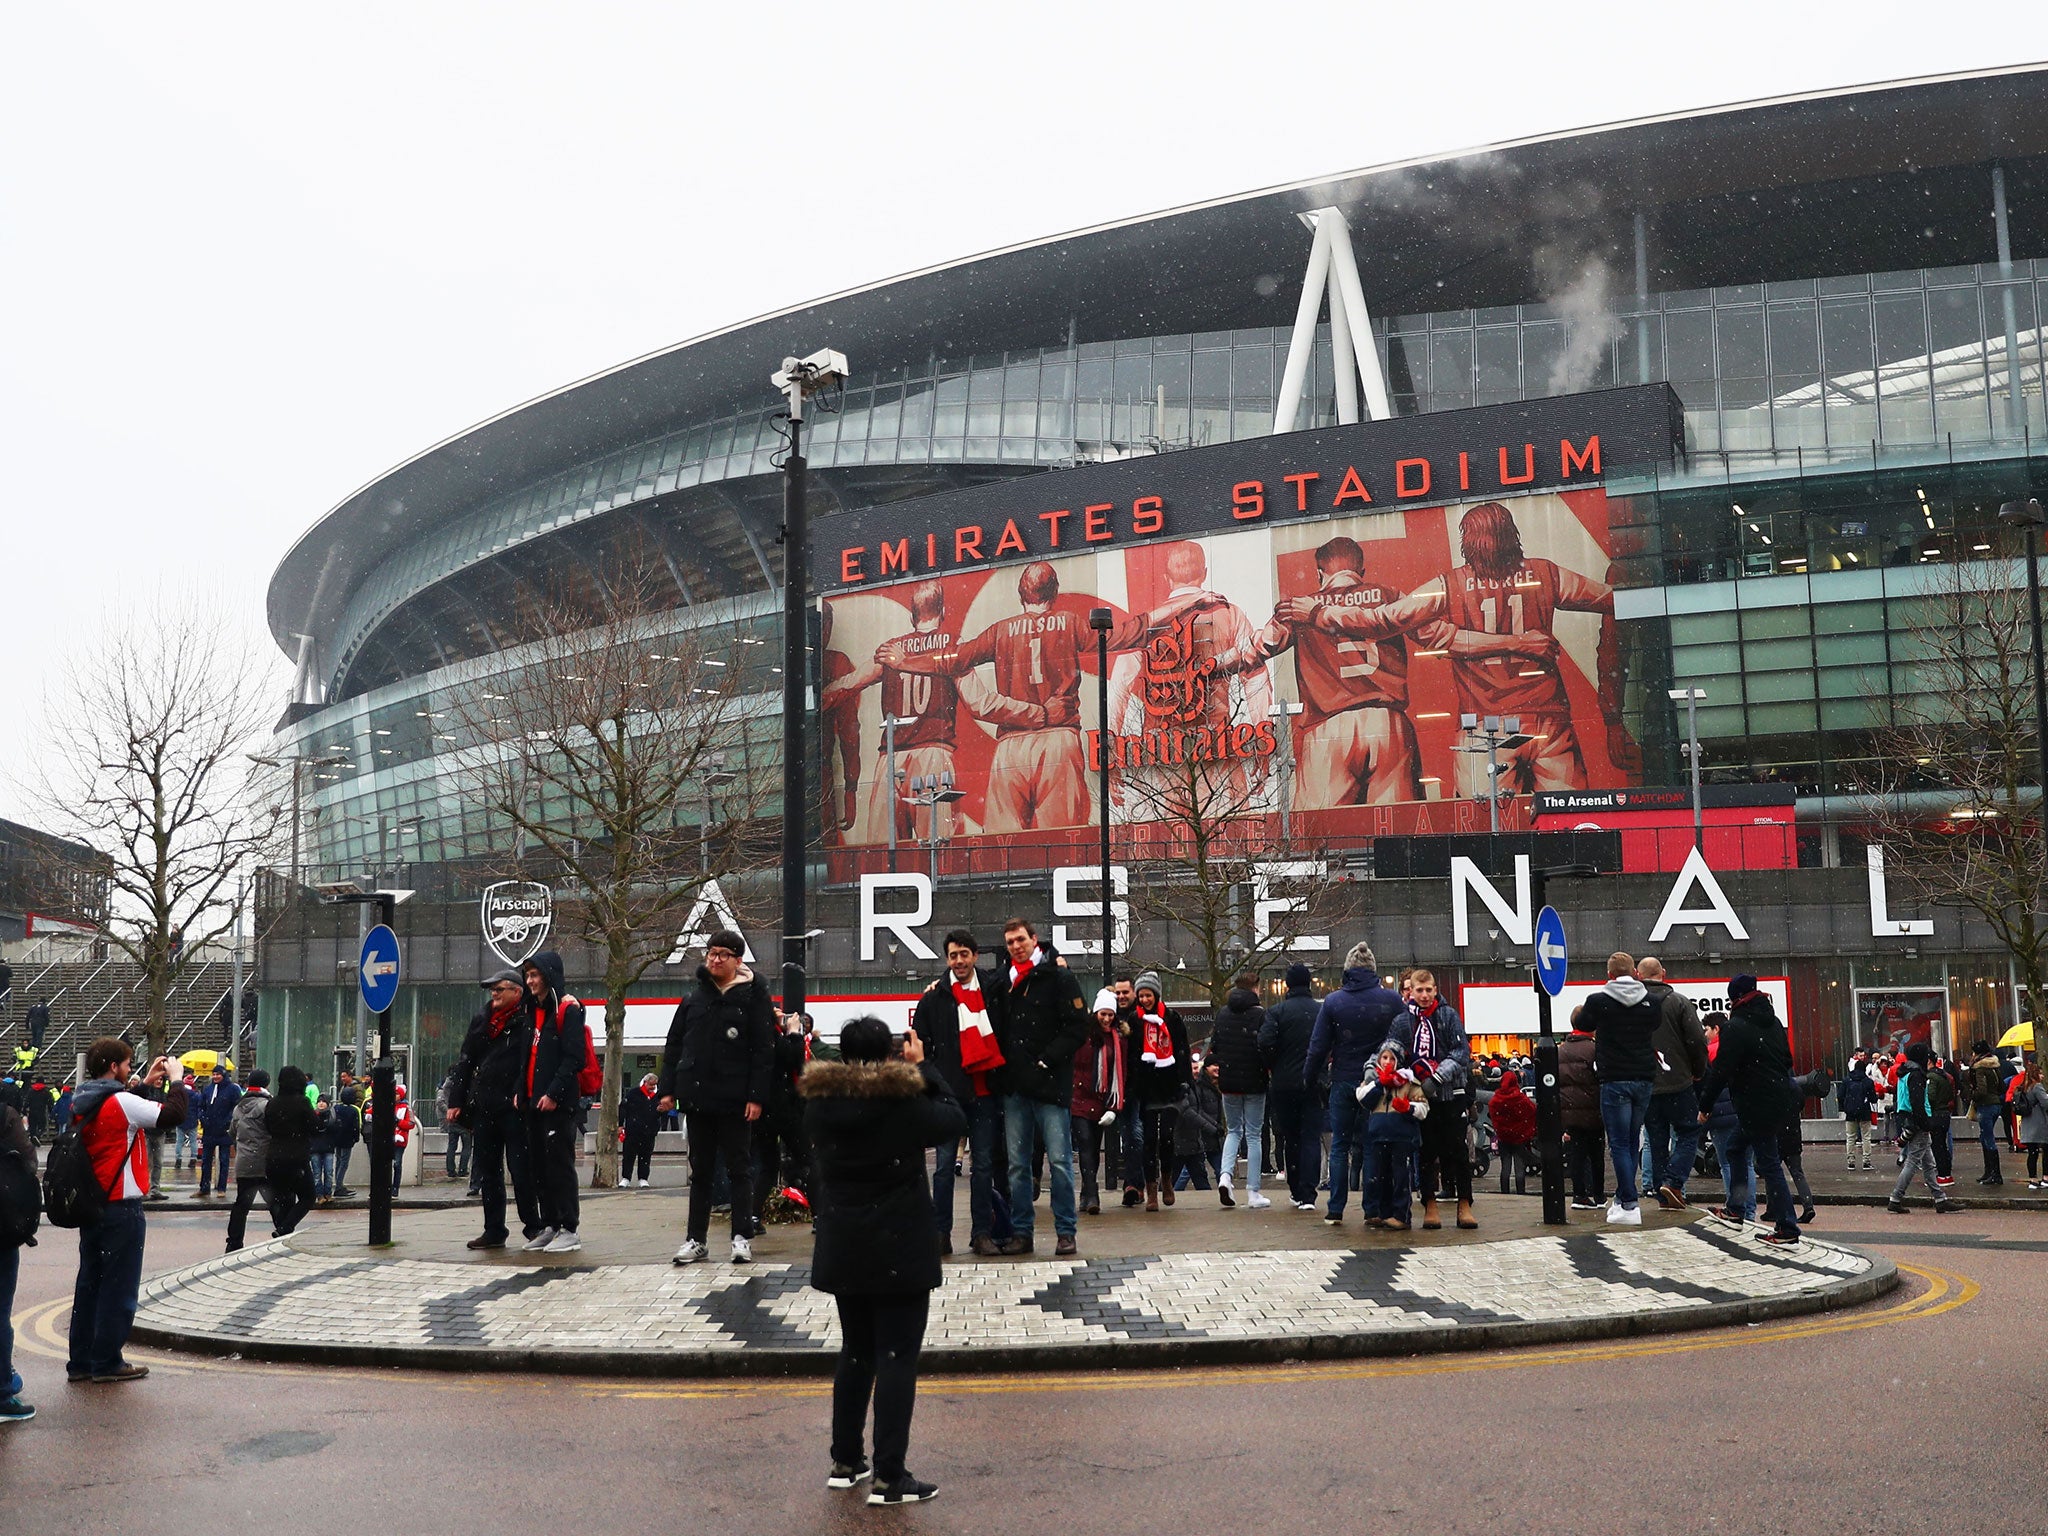 Wholesale change is needed at Arsenal before the club can move forward